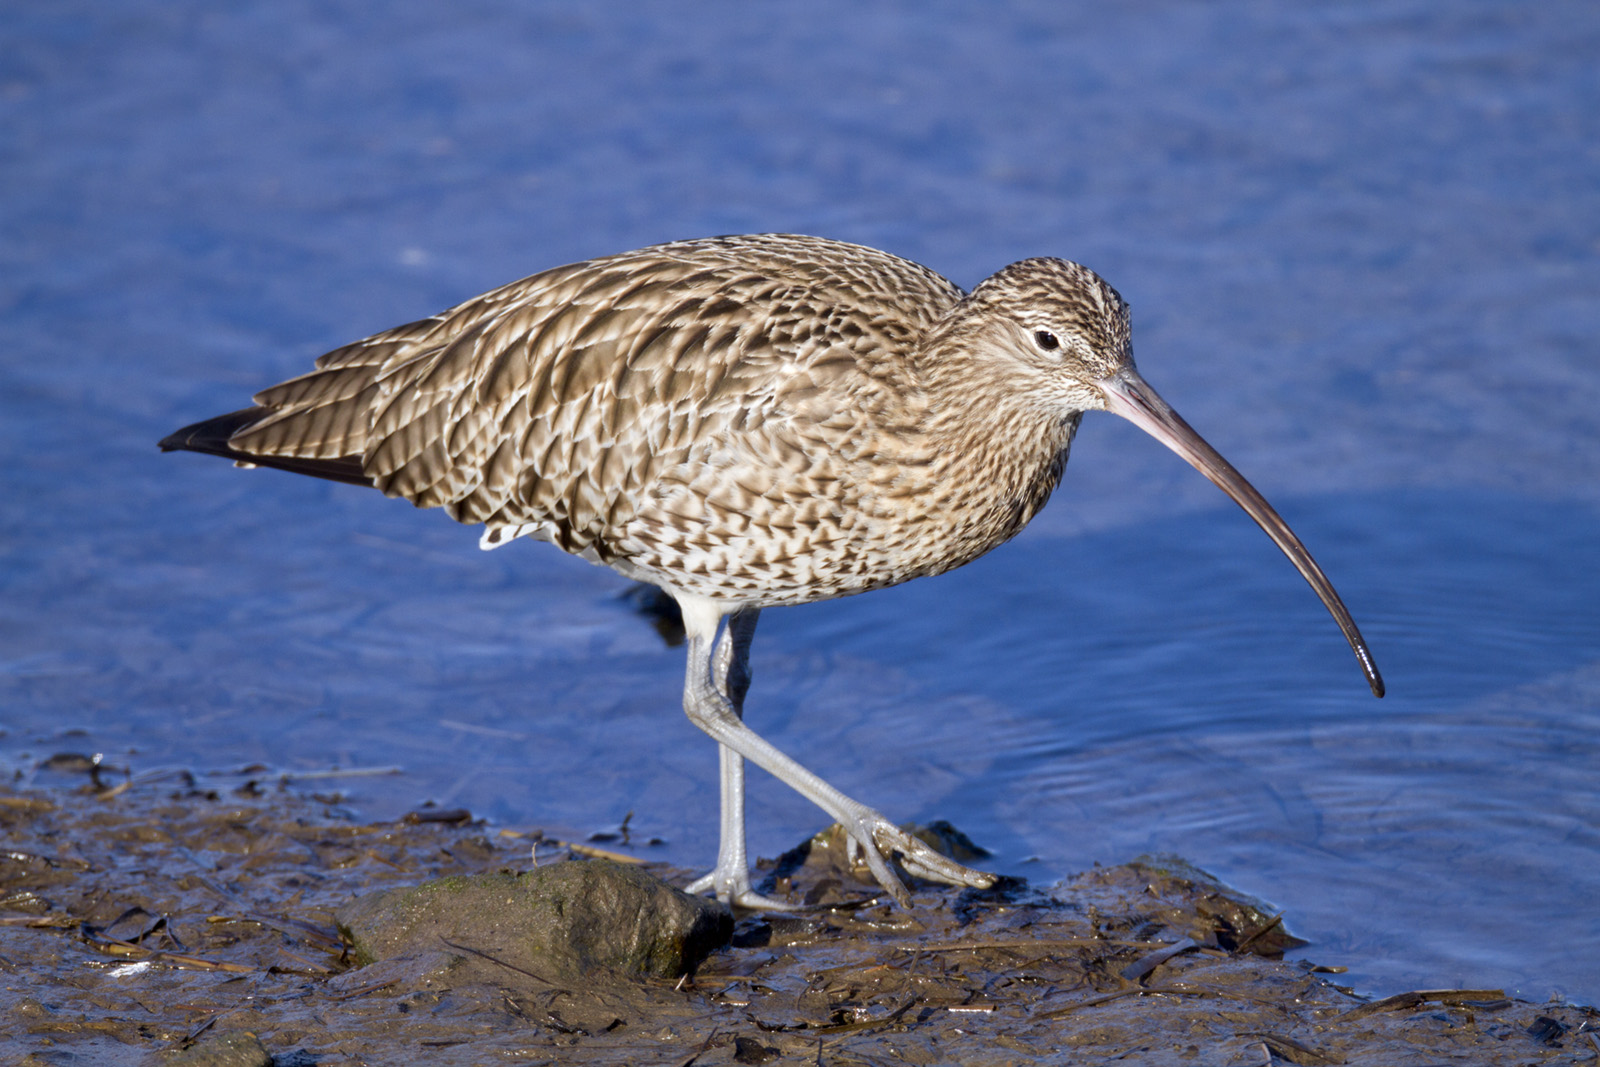 Curlews can usually be spotted at the Hayle Estuary. Credit: David Chapman